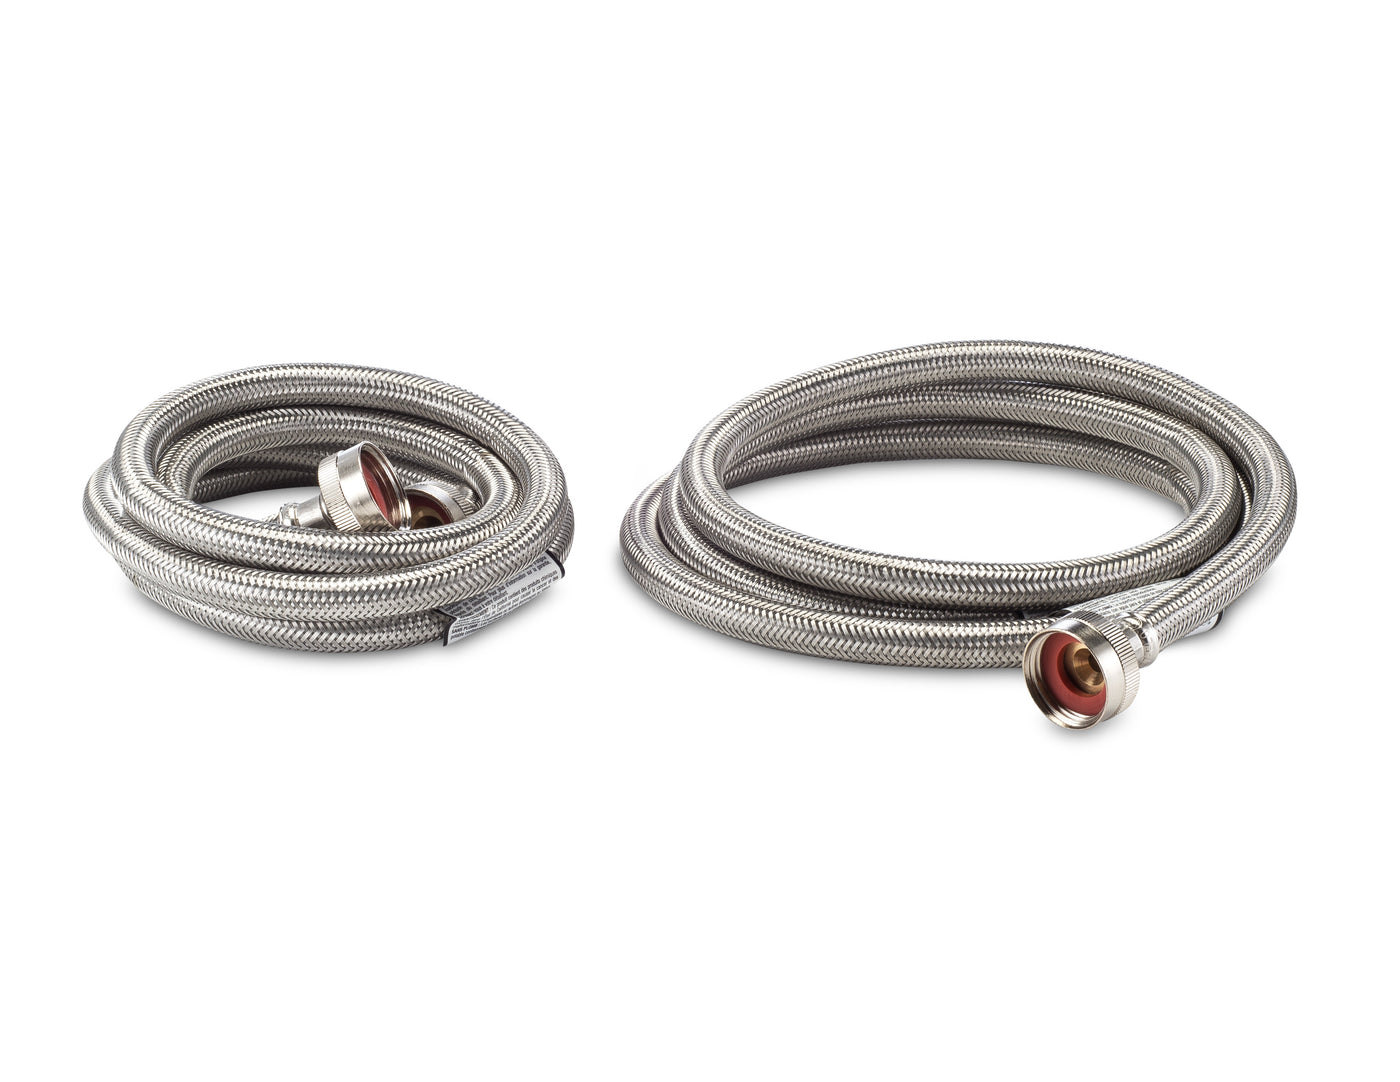 5304437642 in Stainless Steel by Frigidaire in Schenectady, NY - Smart  Choice 6' Long Stainless Steel Braided Refrigerator Water Supply Line